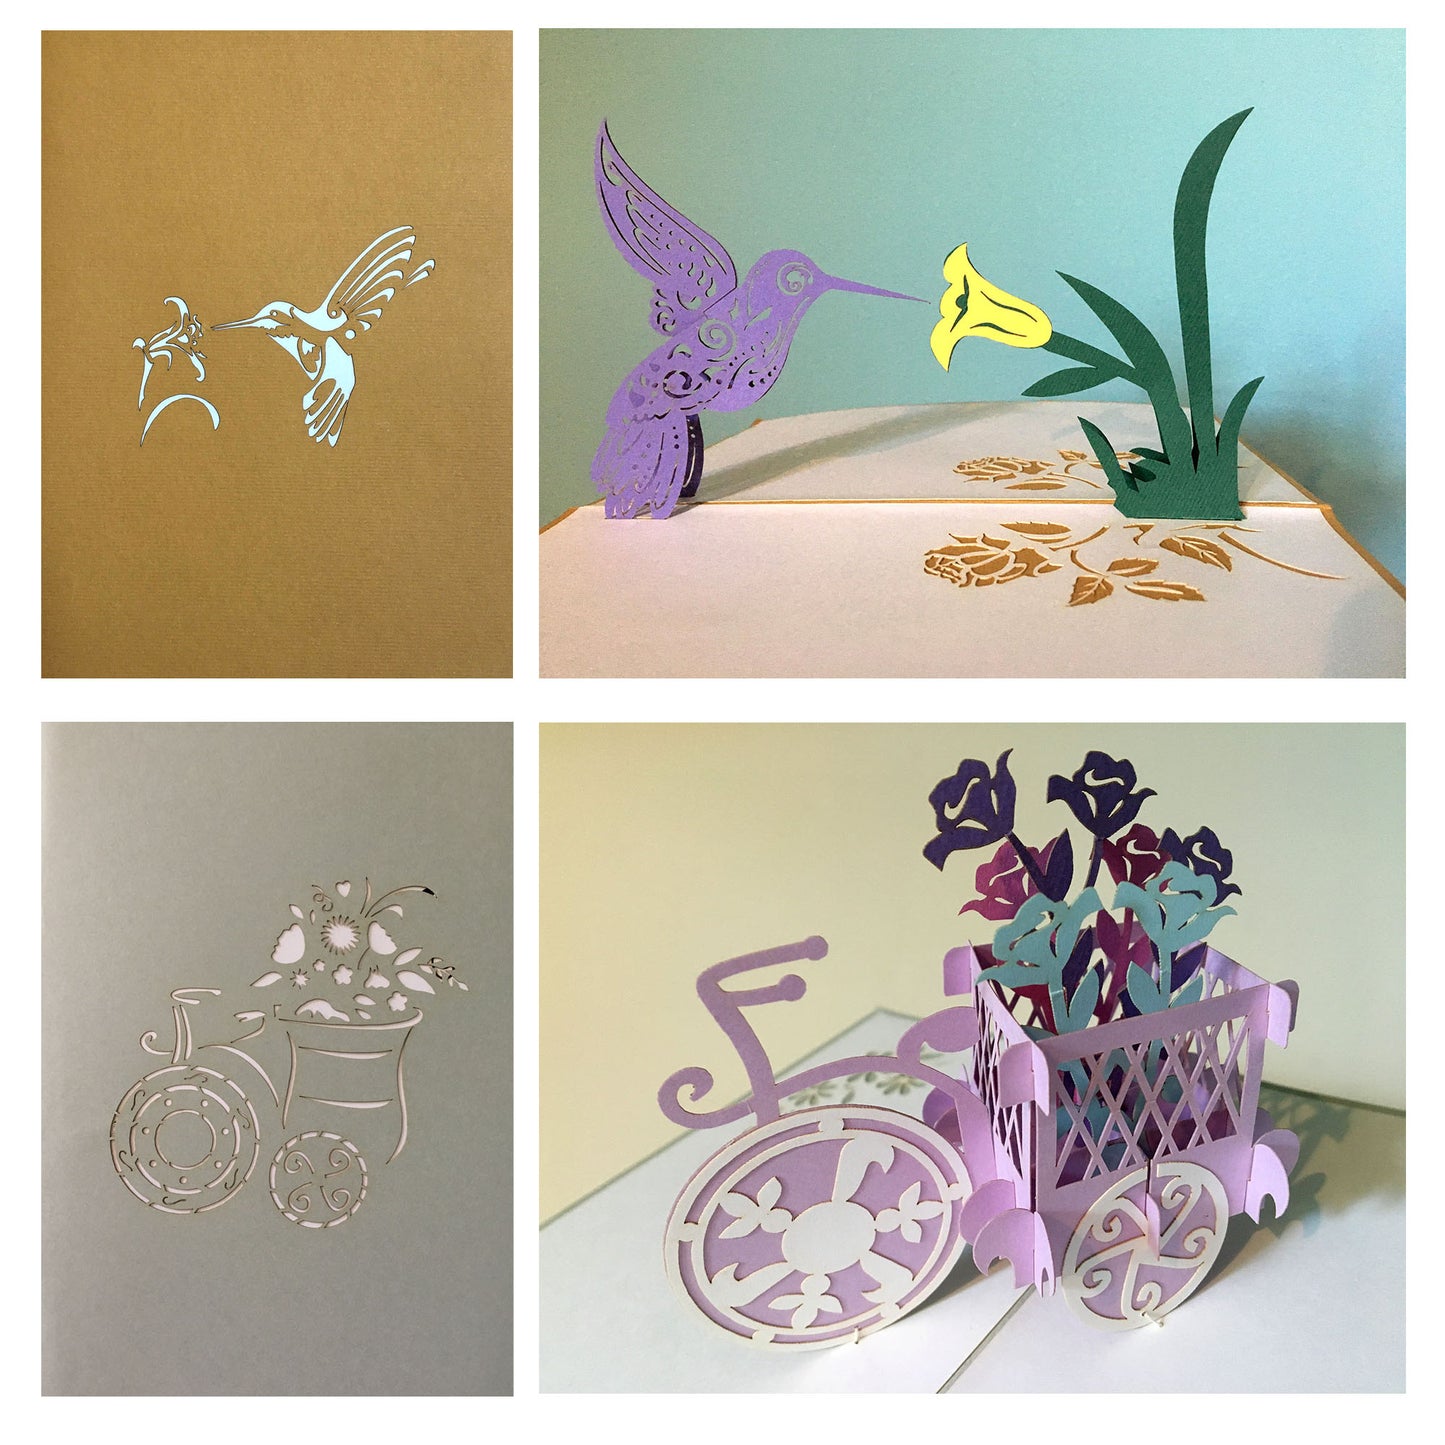 (2 Cards Pack) 3D Pop Up Flower Greeting Card 5x7 Inch 12.7 cm - Bicycle Flower Hummingbird